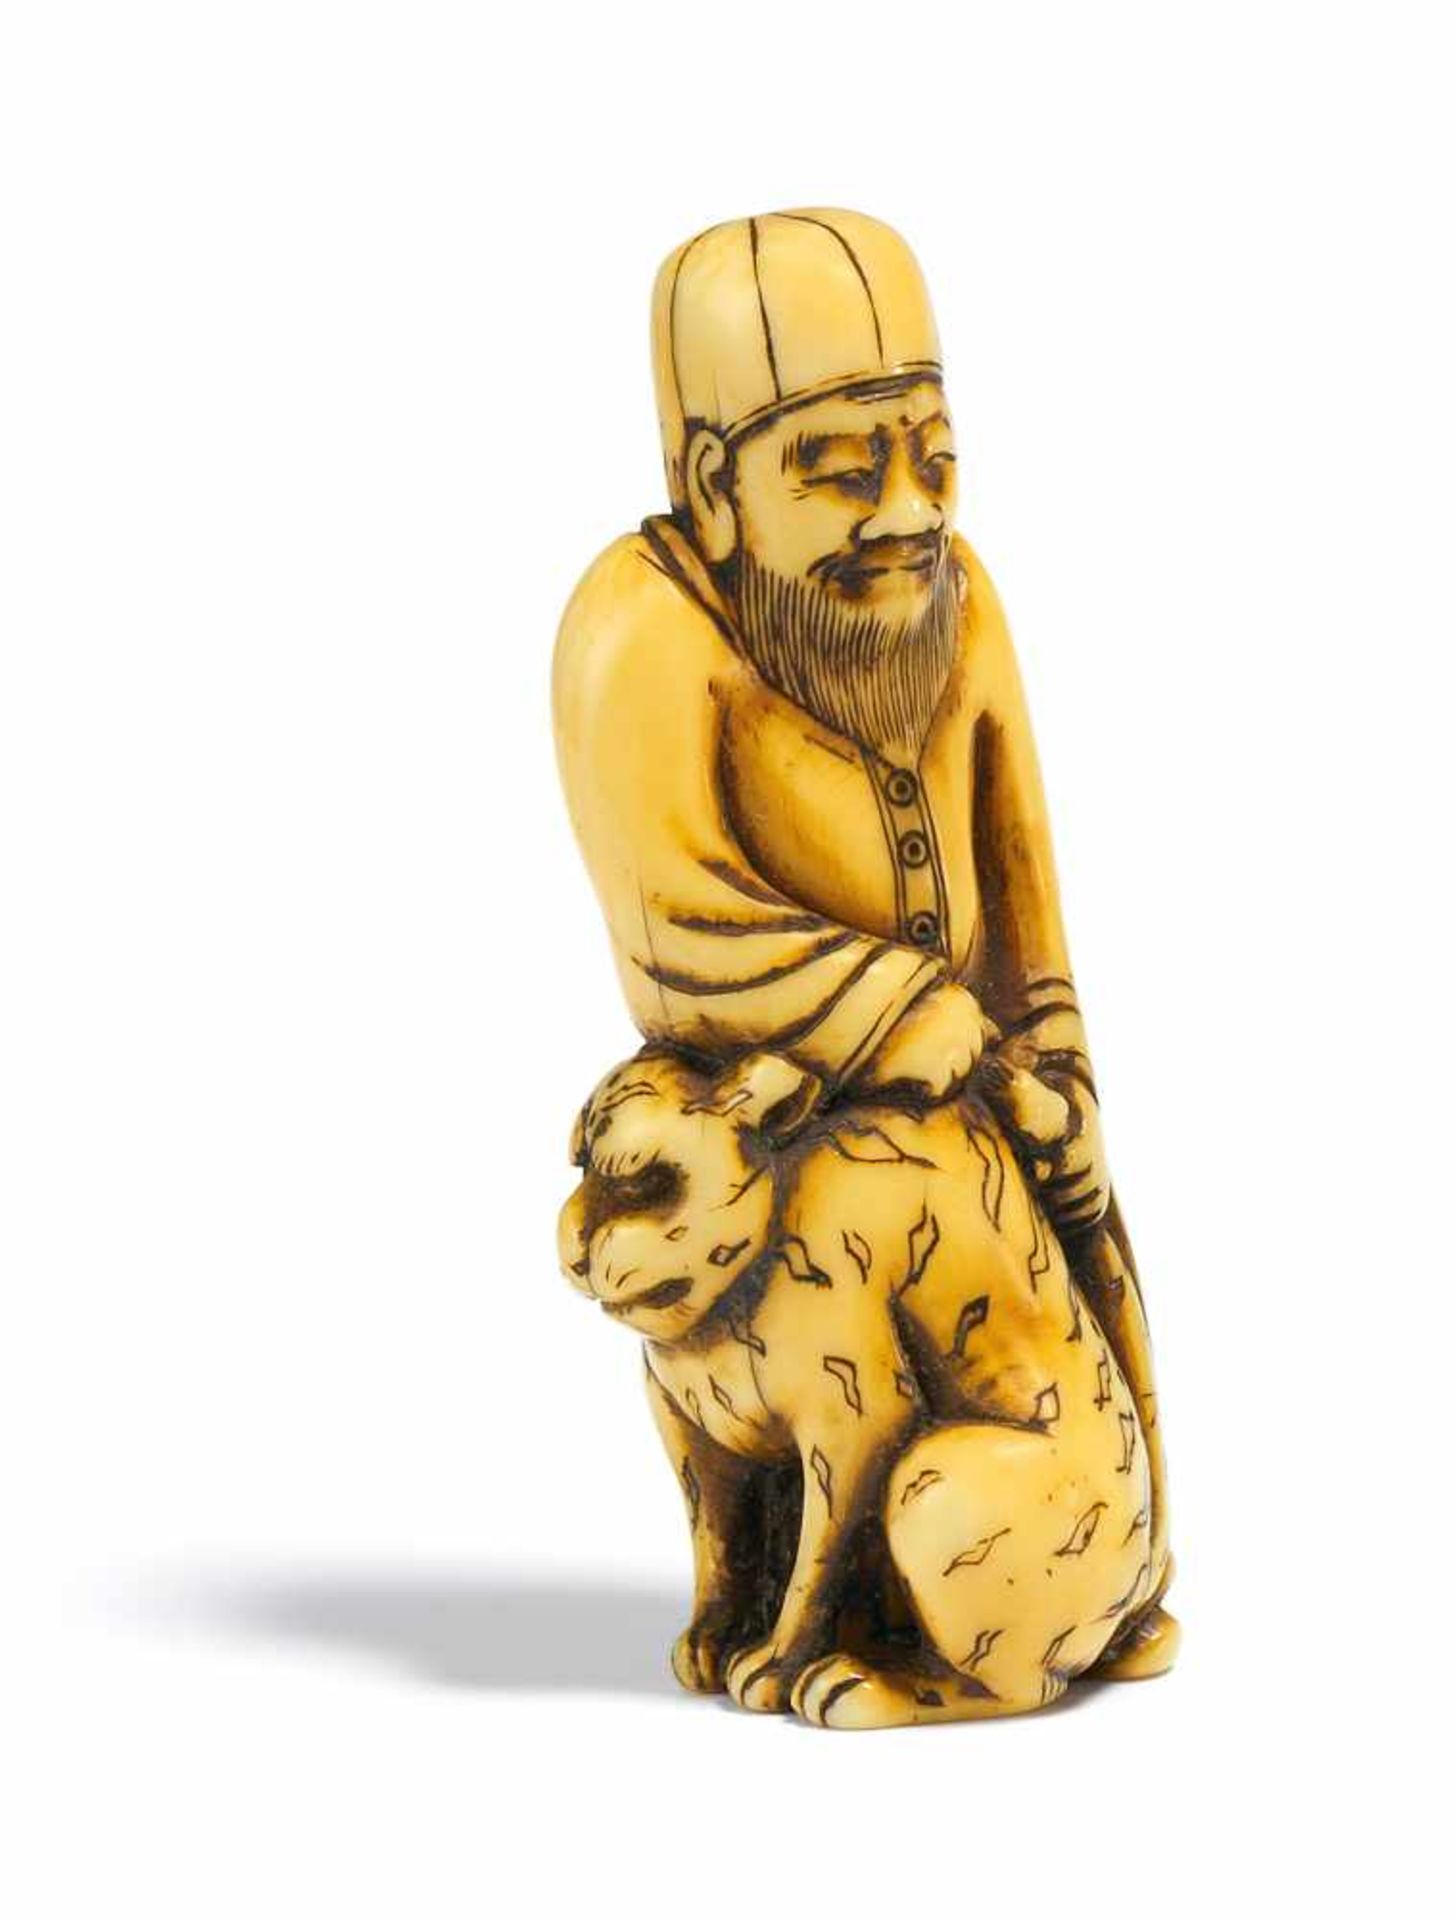 NETSUKE: WEST ASIAN MAN WITH TIGER. Japan. 18th c. Ivory with amber yellow patina. Height 5.5cm.